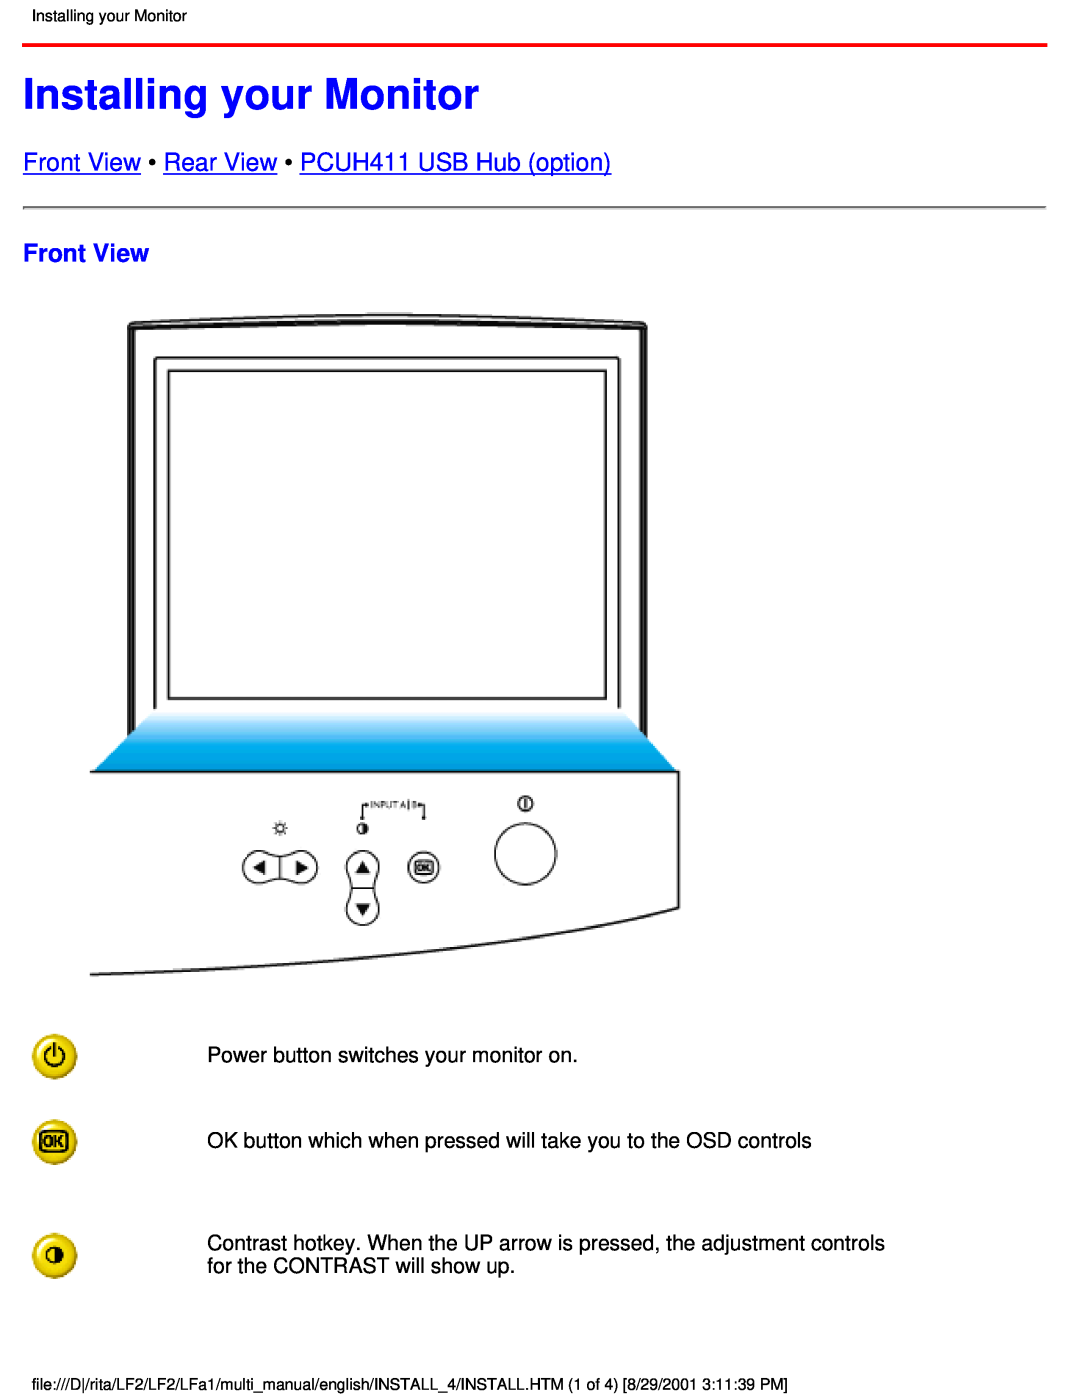 Philips 201B user manual Installing your Monitor, Front View Rear View PCUH411 USB Hub option 